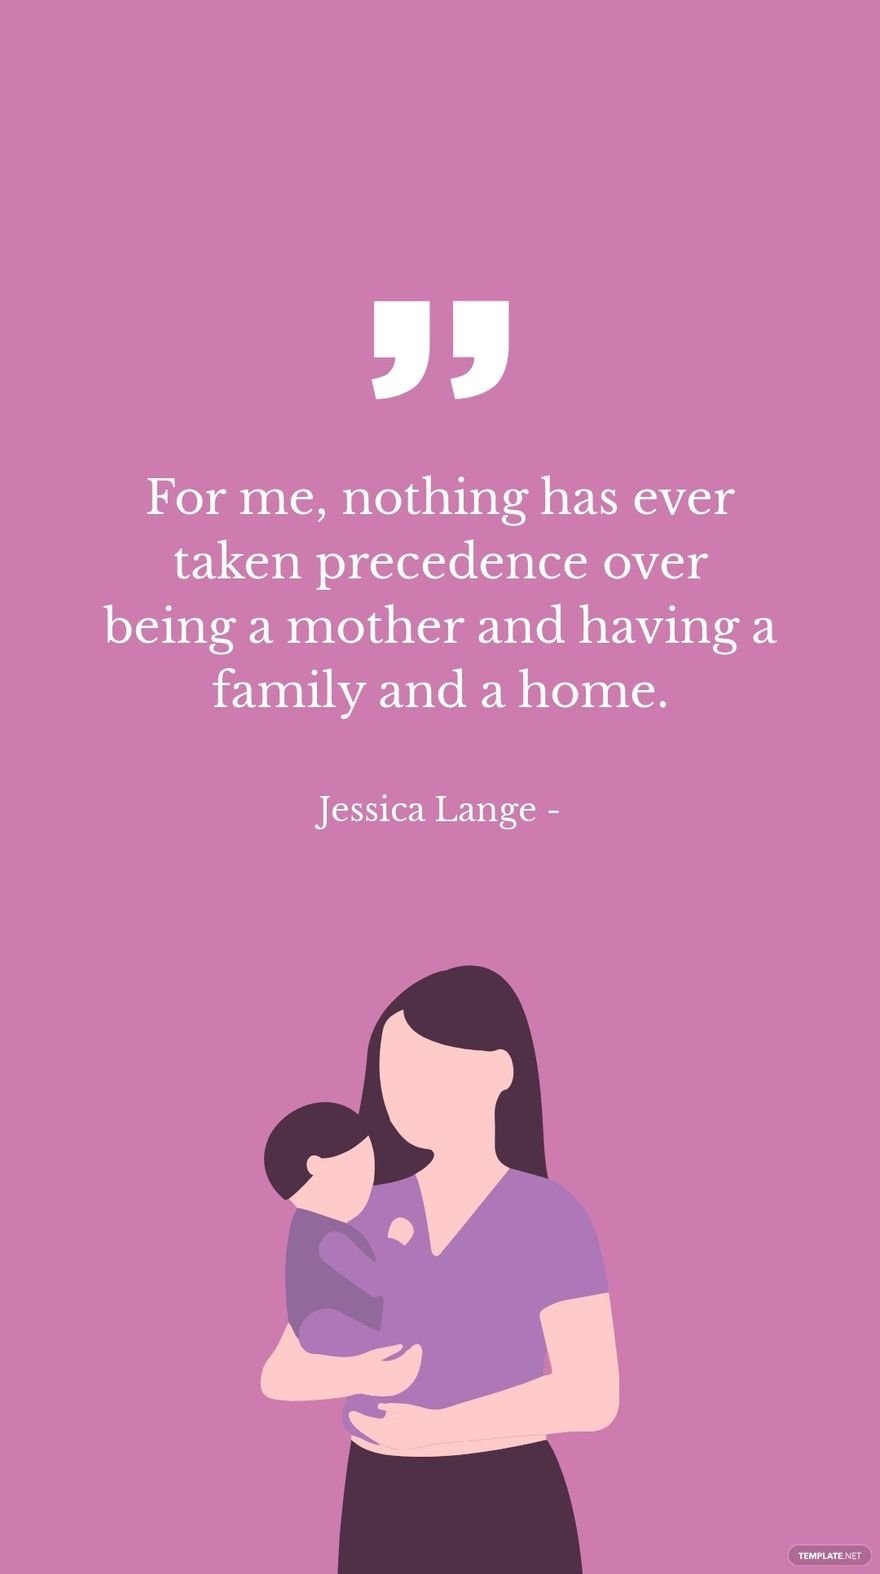 Jessica Lange - For me, nothing has ever taken precedence over being a mother and having a family and a home.